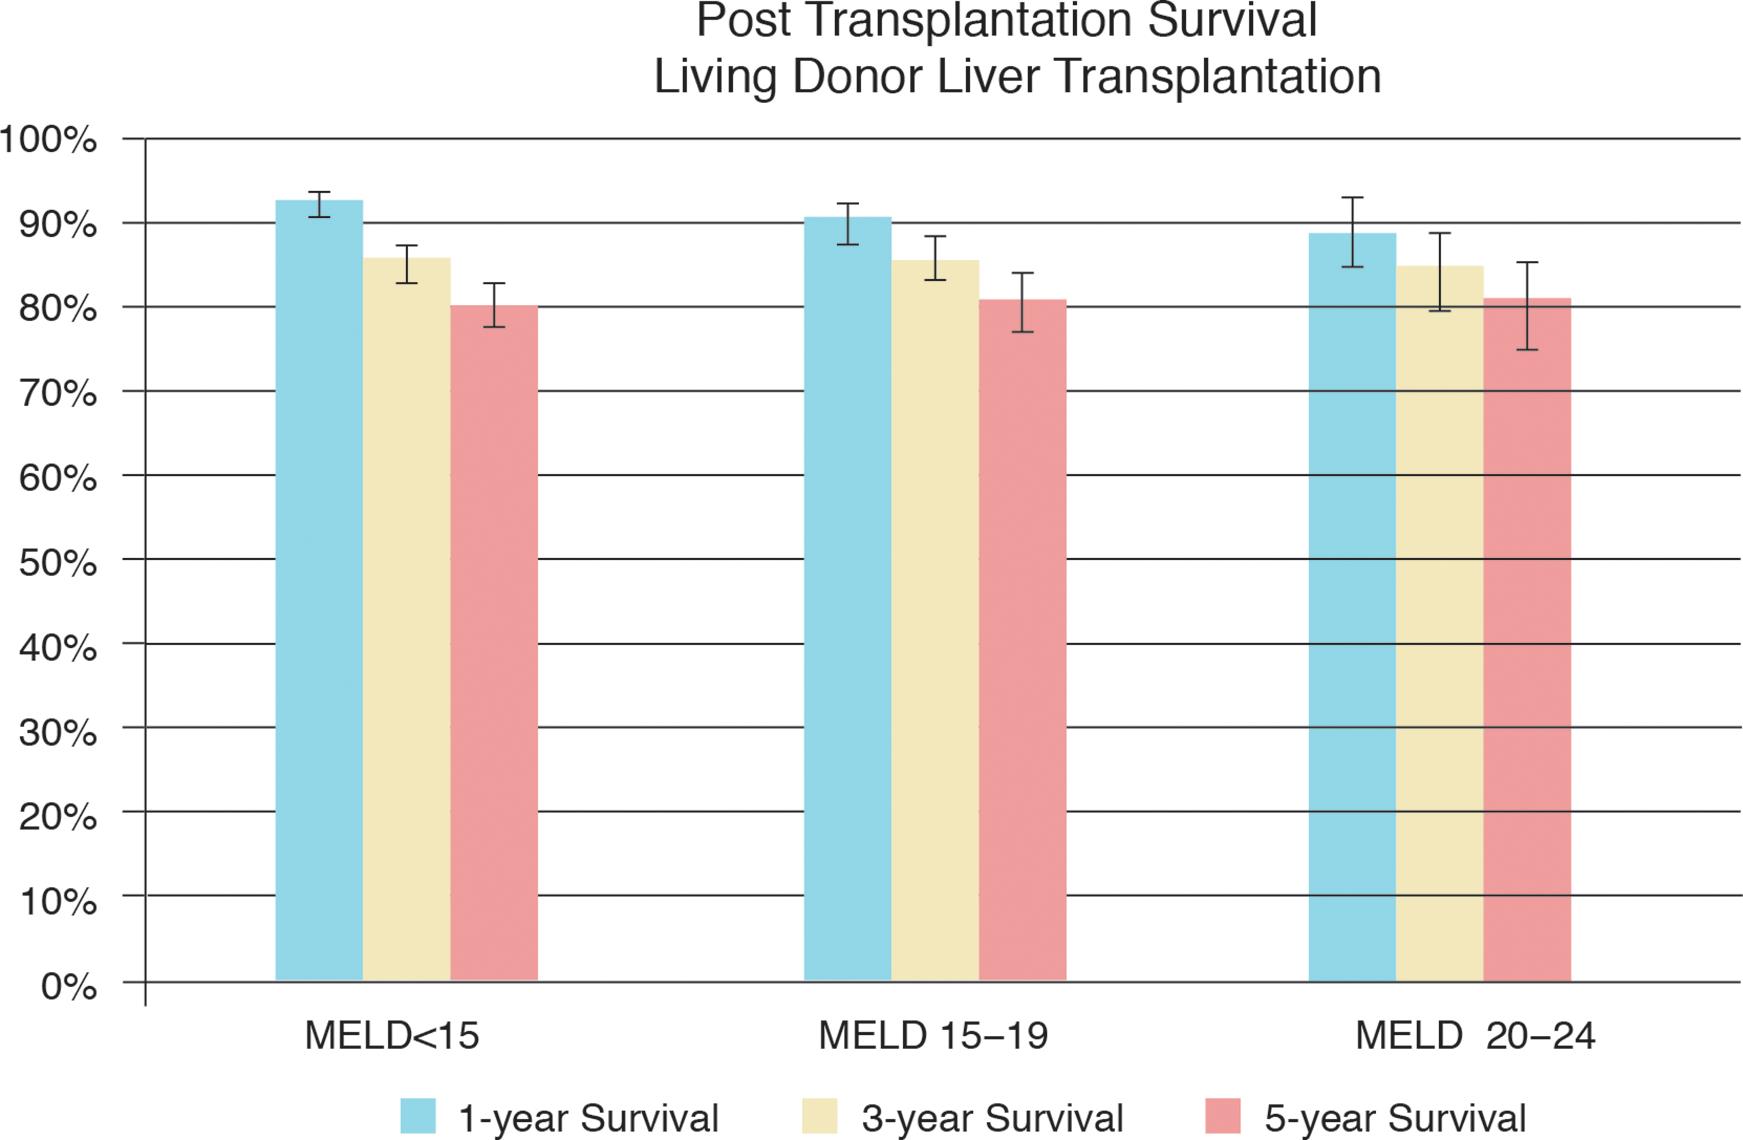 Compared to patients with MELD <15, overall 1-year 3-year, and 5-year survival following LDLT were similar among patients with MELD 15–19 and MELD 20–24.